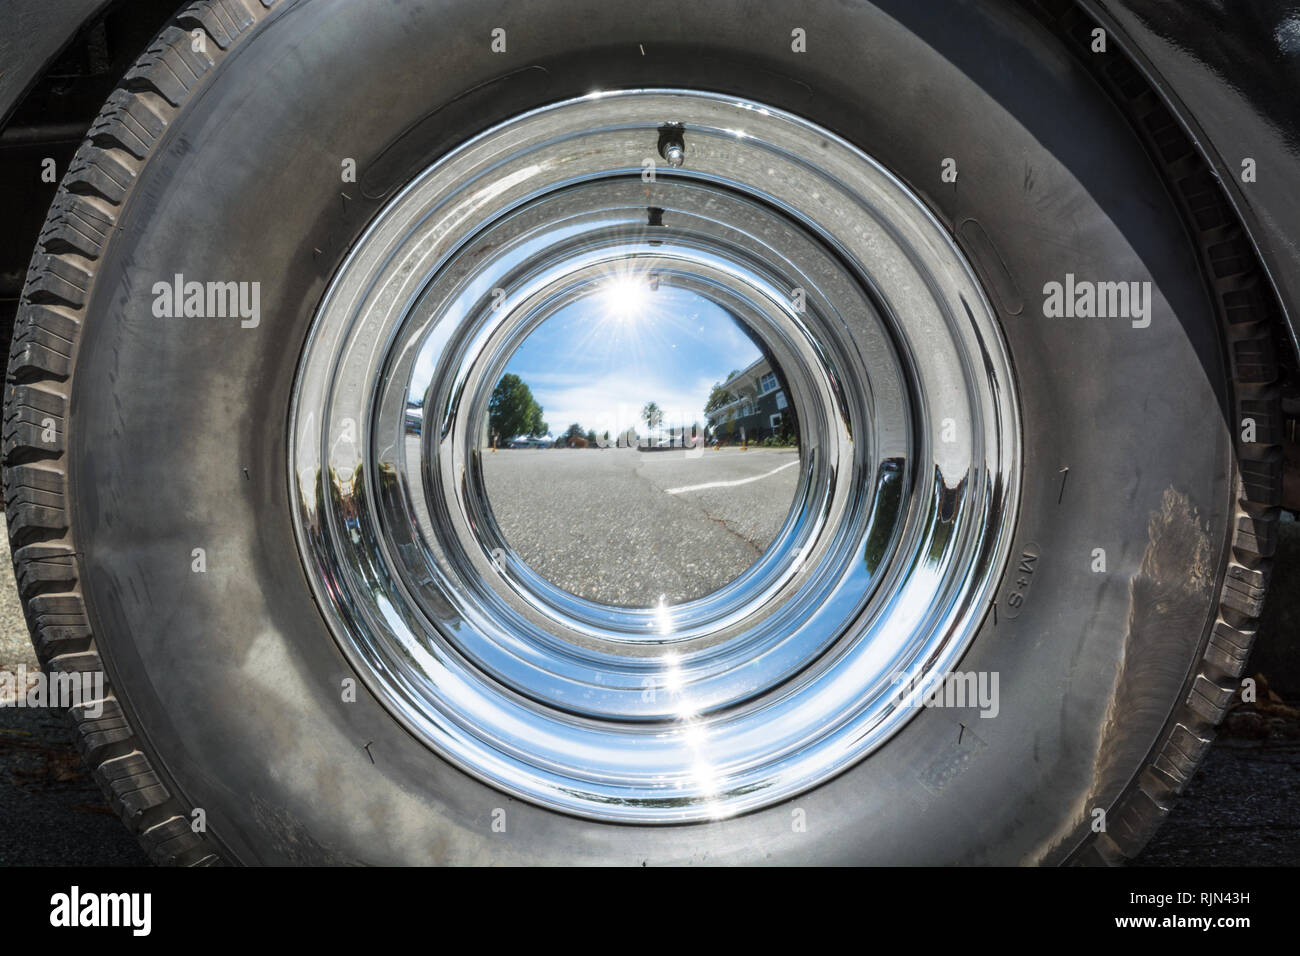 Black tire and chrome mirror cover on the wheel of vintage car. Stock Photo